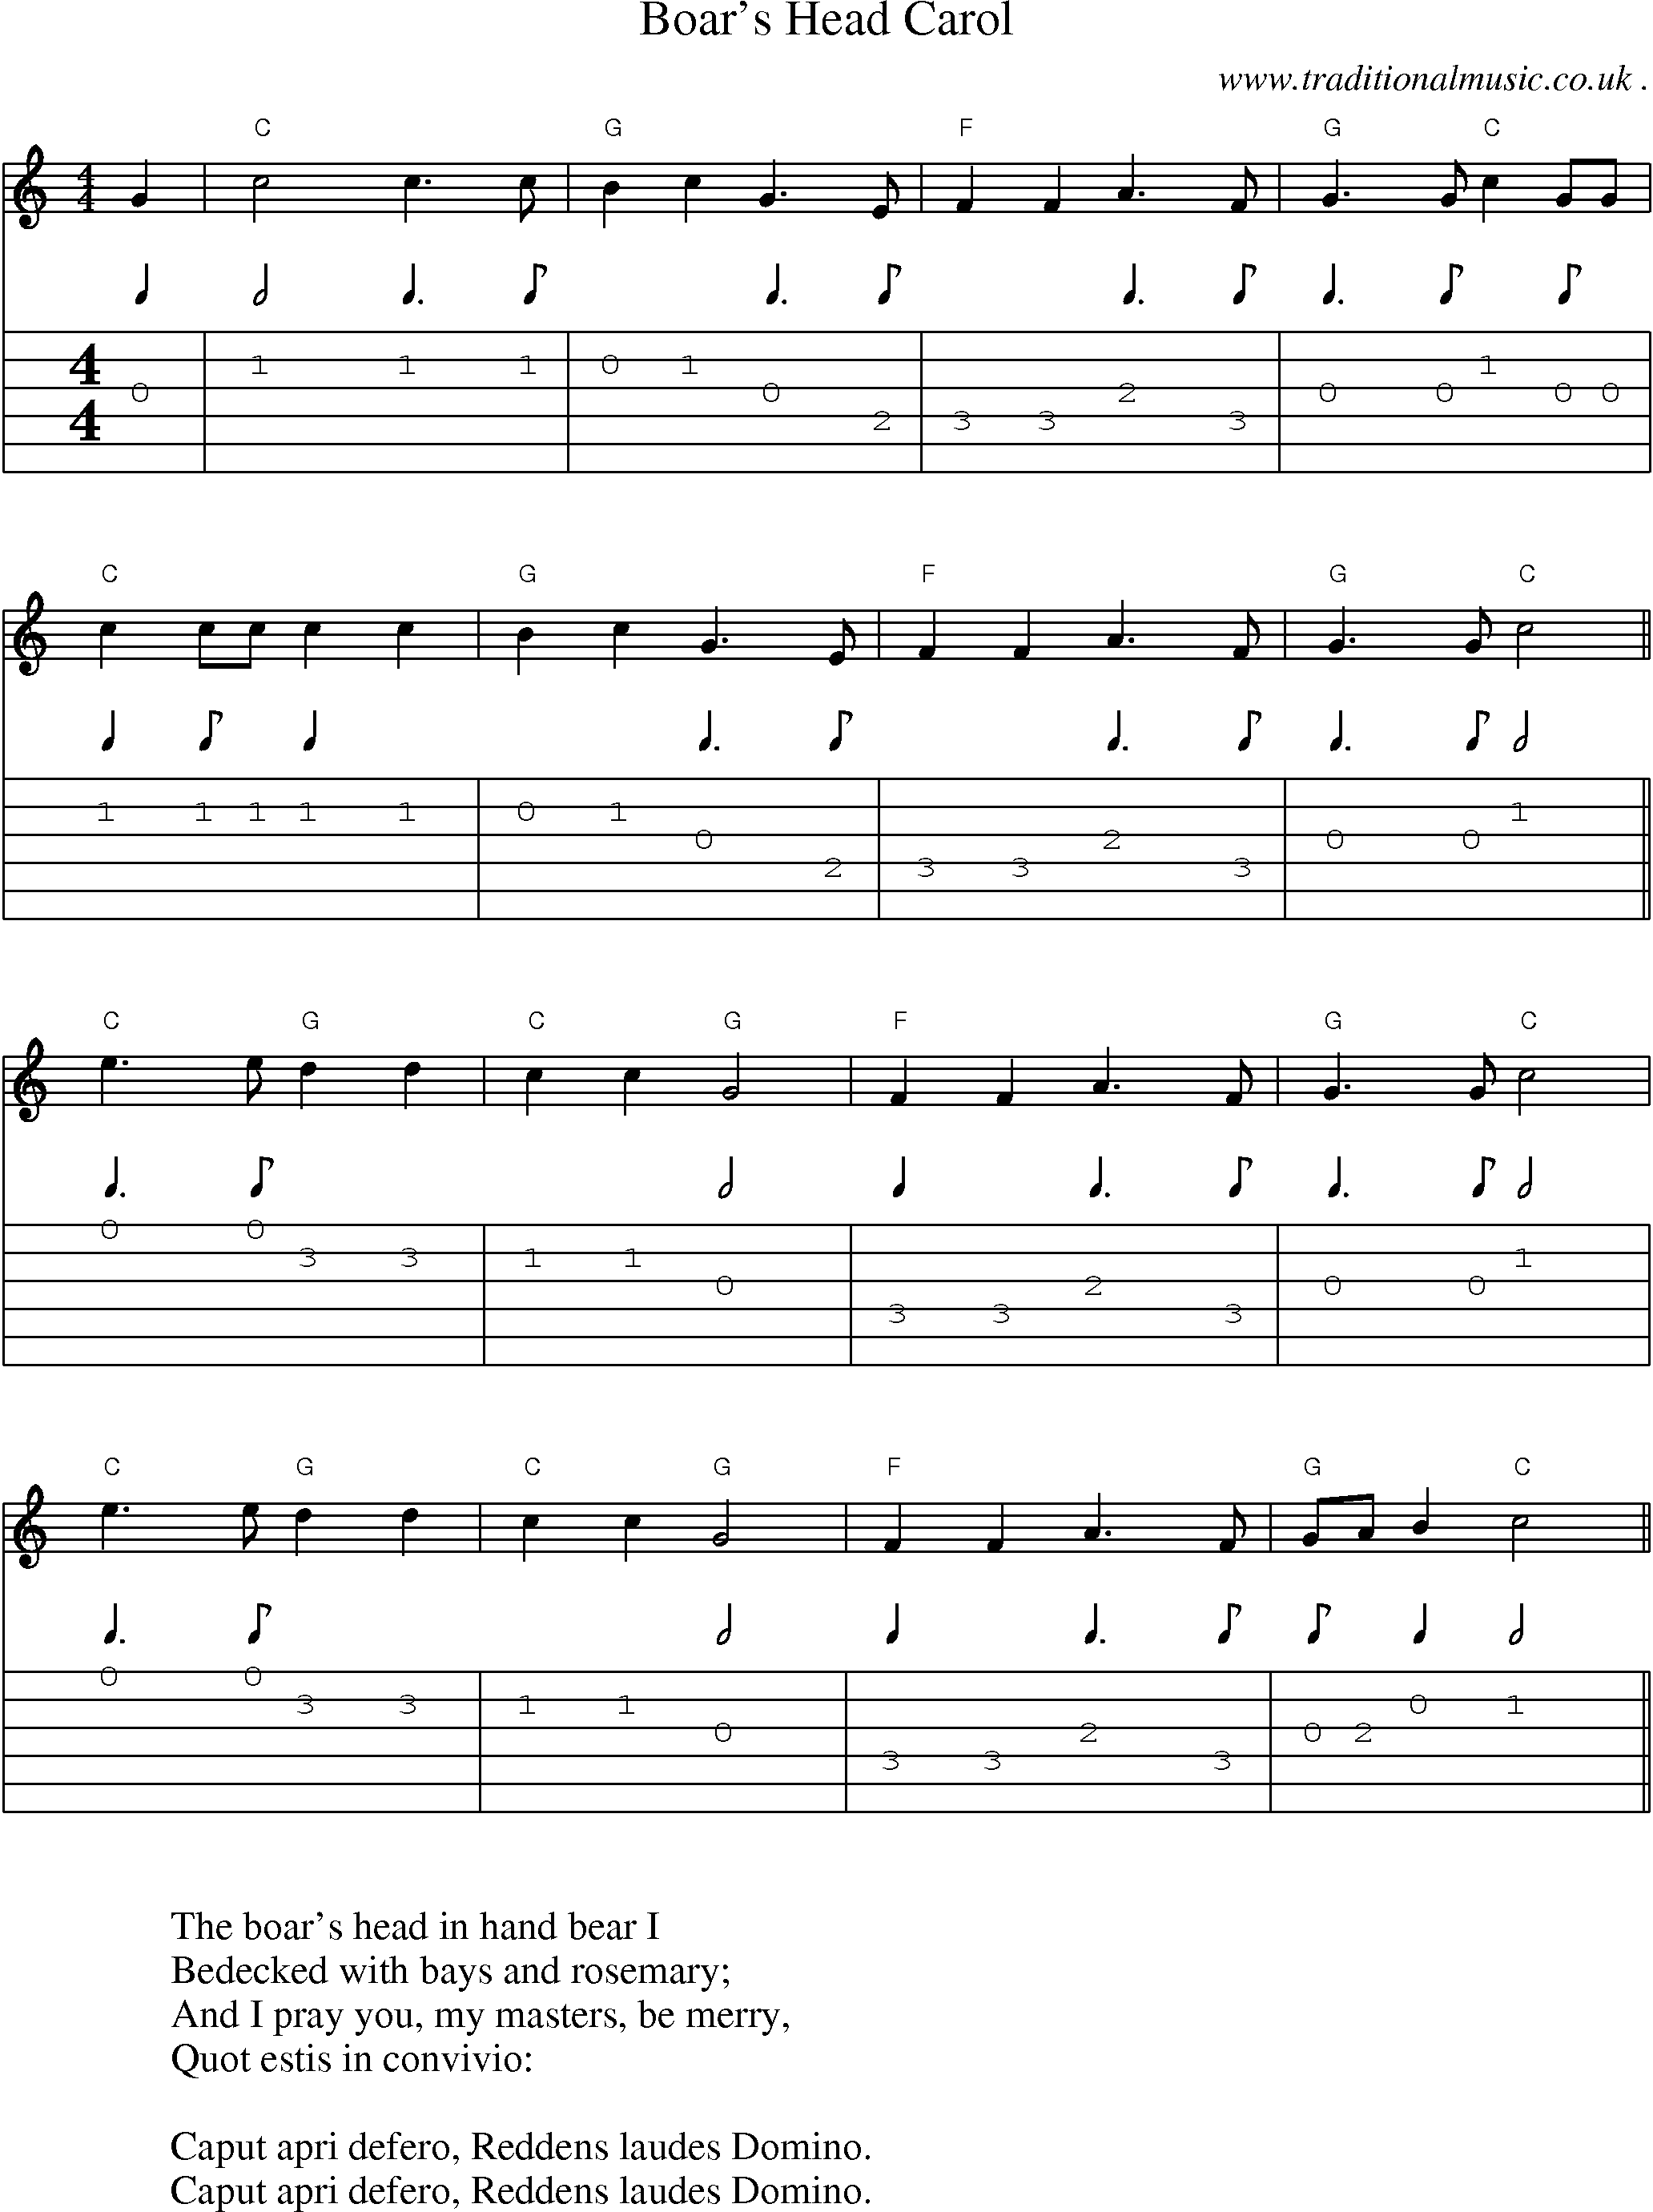 Music Score and Guitar Tabs for Boars Head Carol